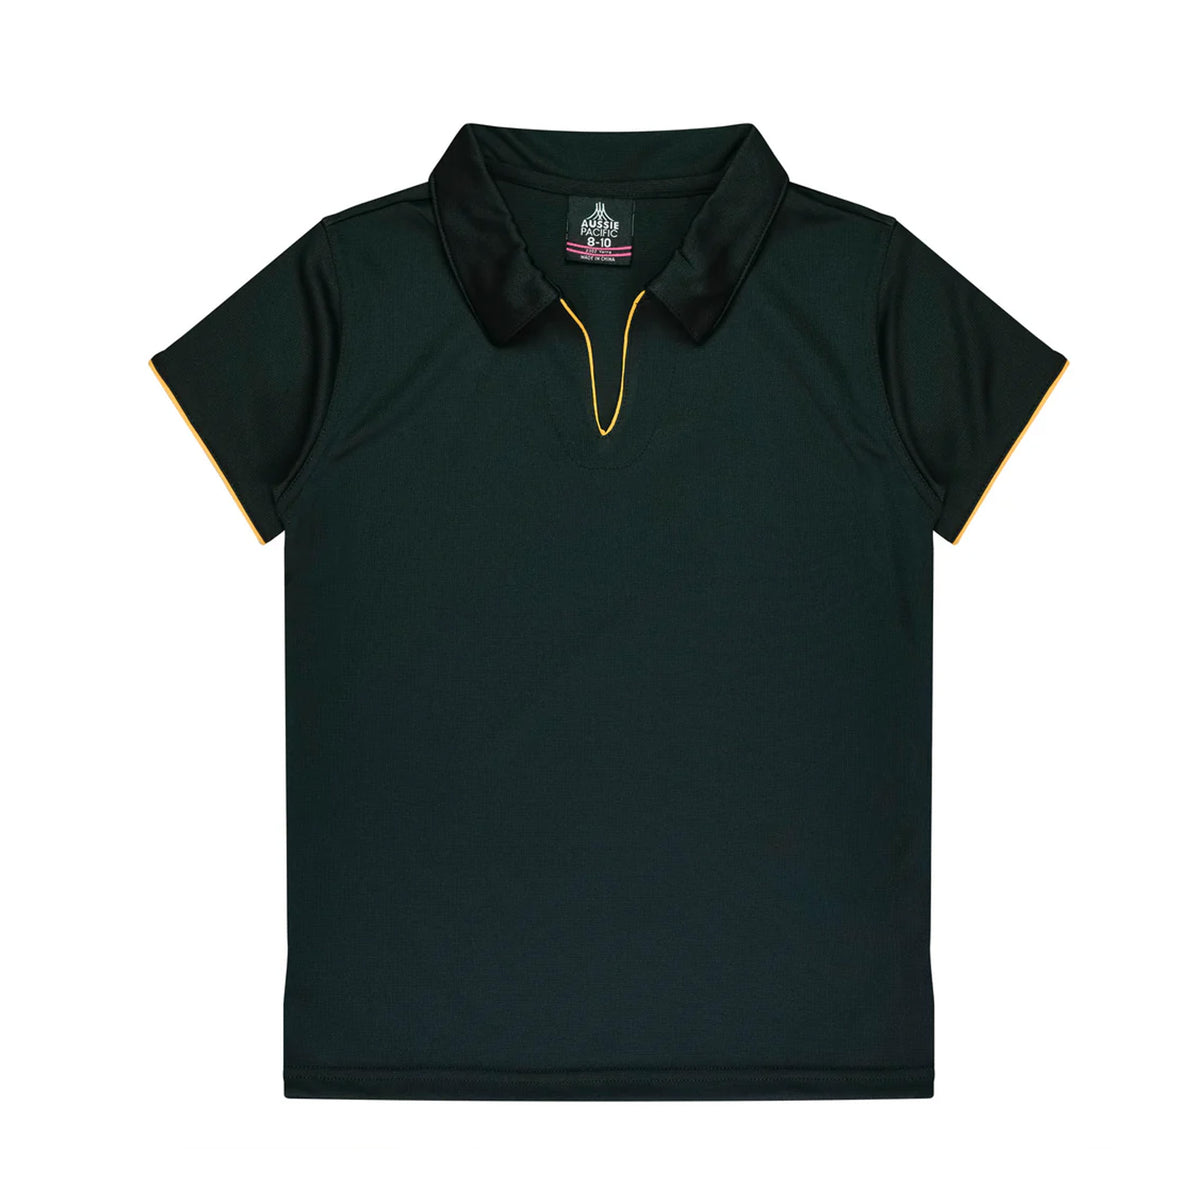 aussie pacific yarra ladies polo in black gold